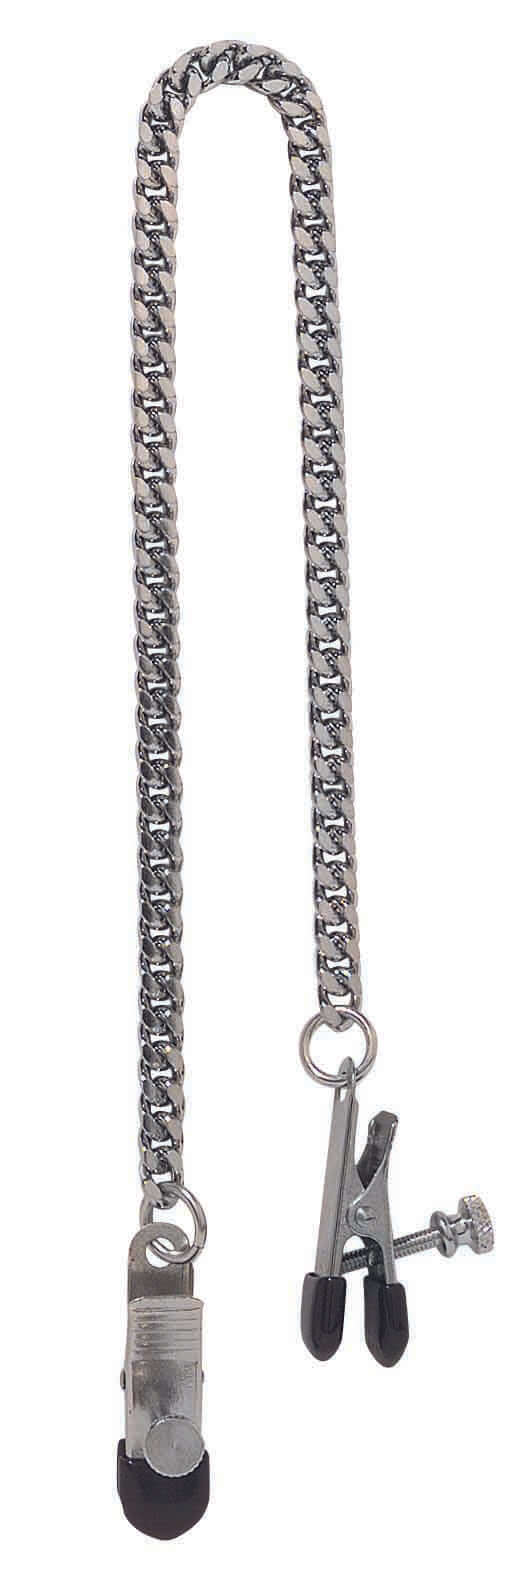 Spartacus ADJUSTABLE NIPPLE CLAMPS at $13.99